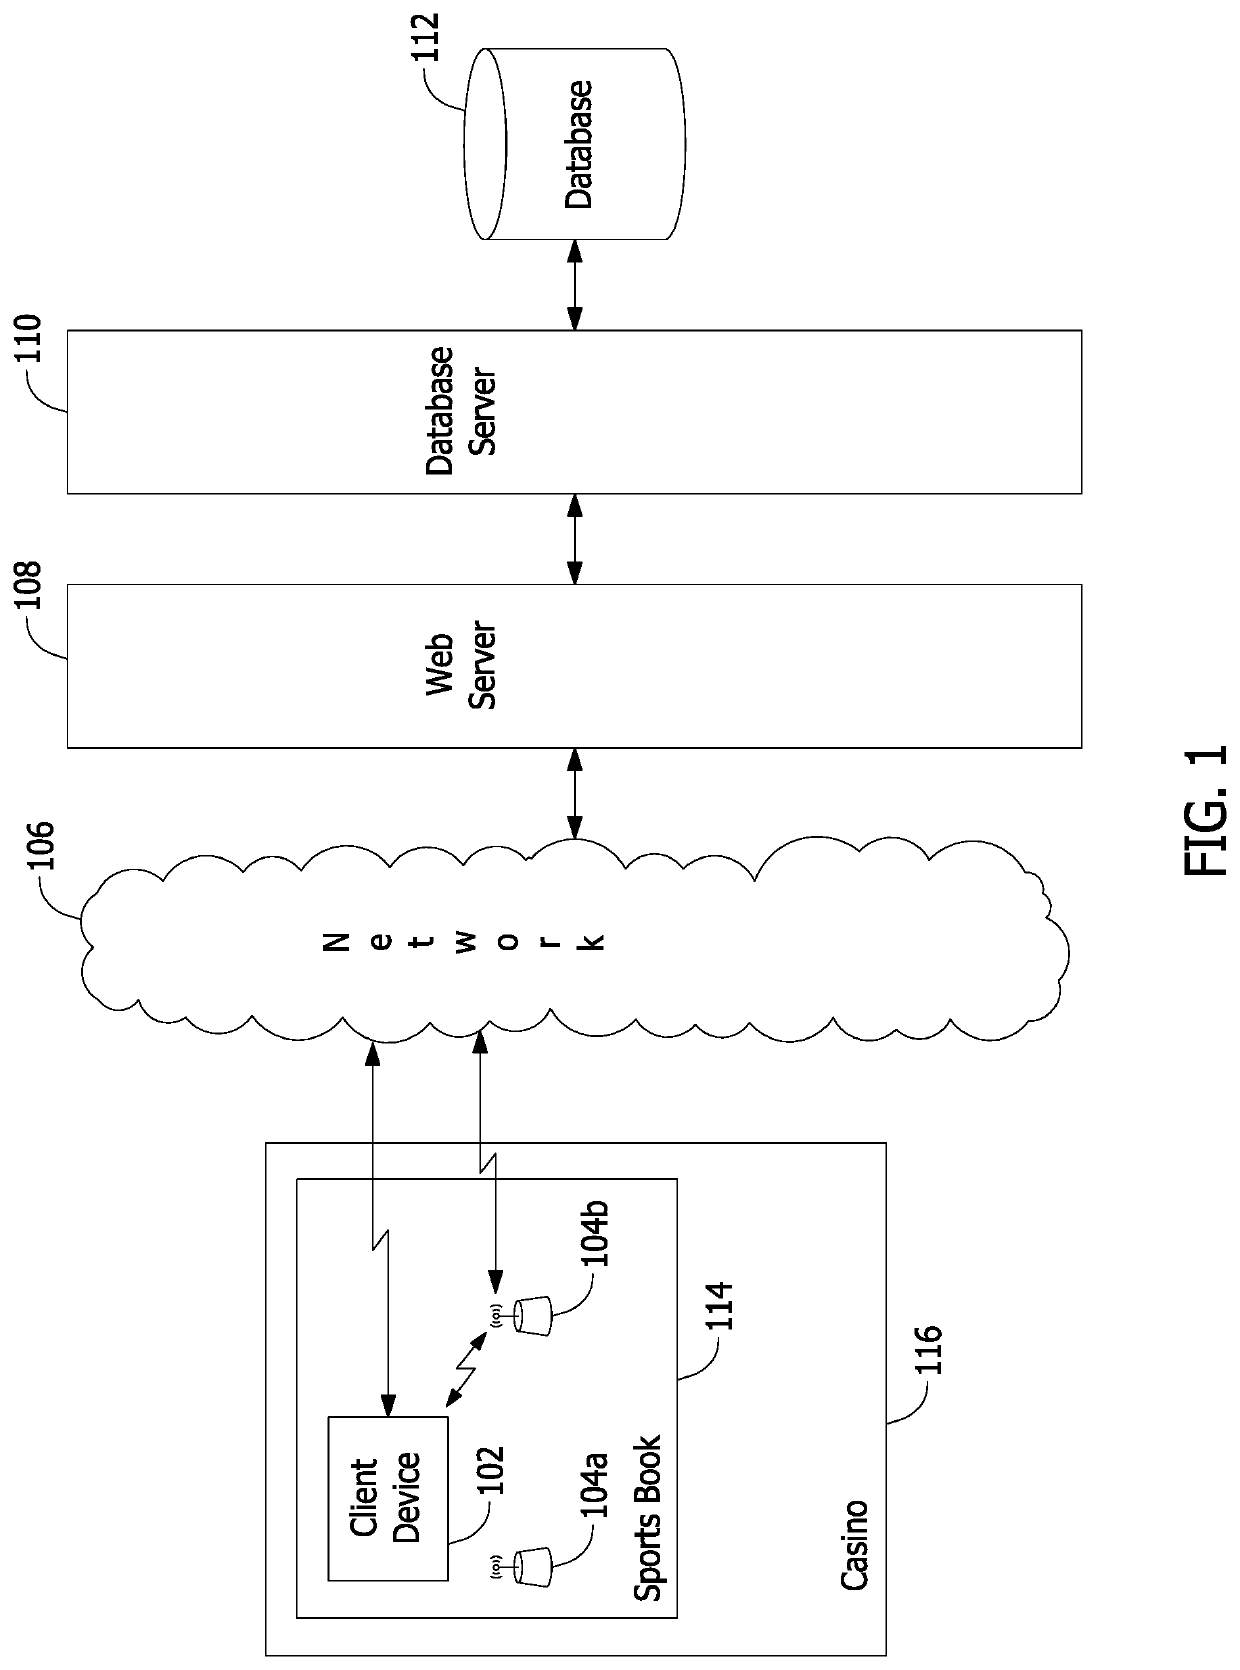 Systems and methods for multi-factor location-based device verification